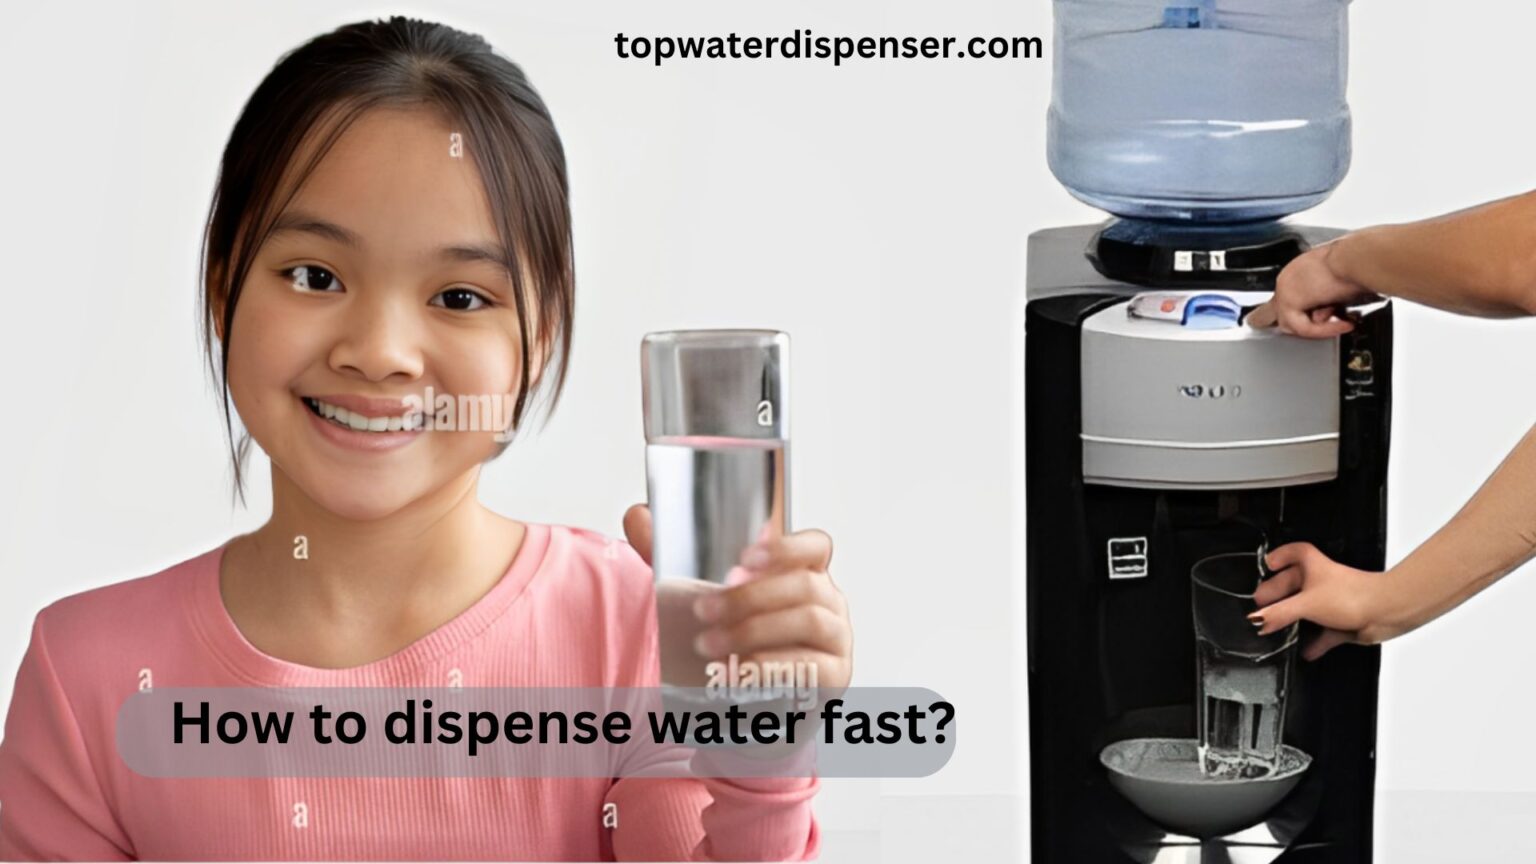 How to dispense water fast?